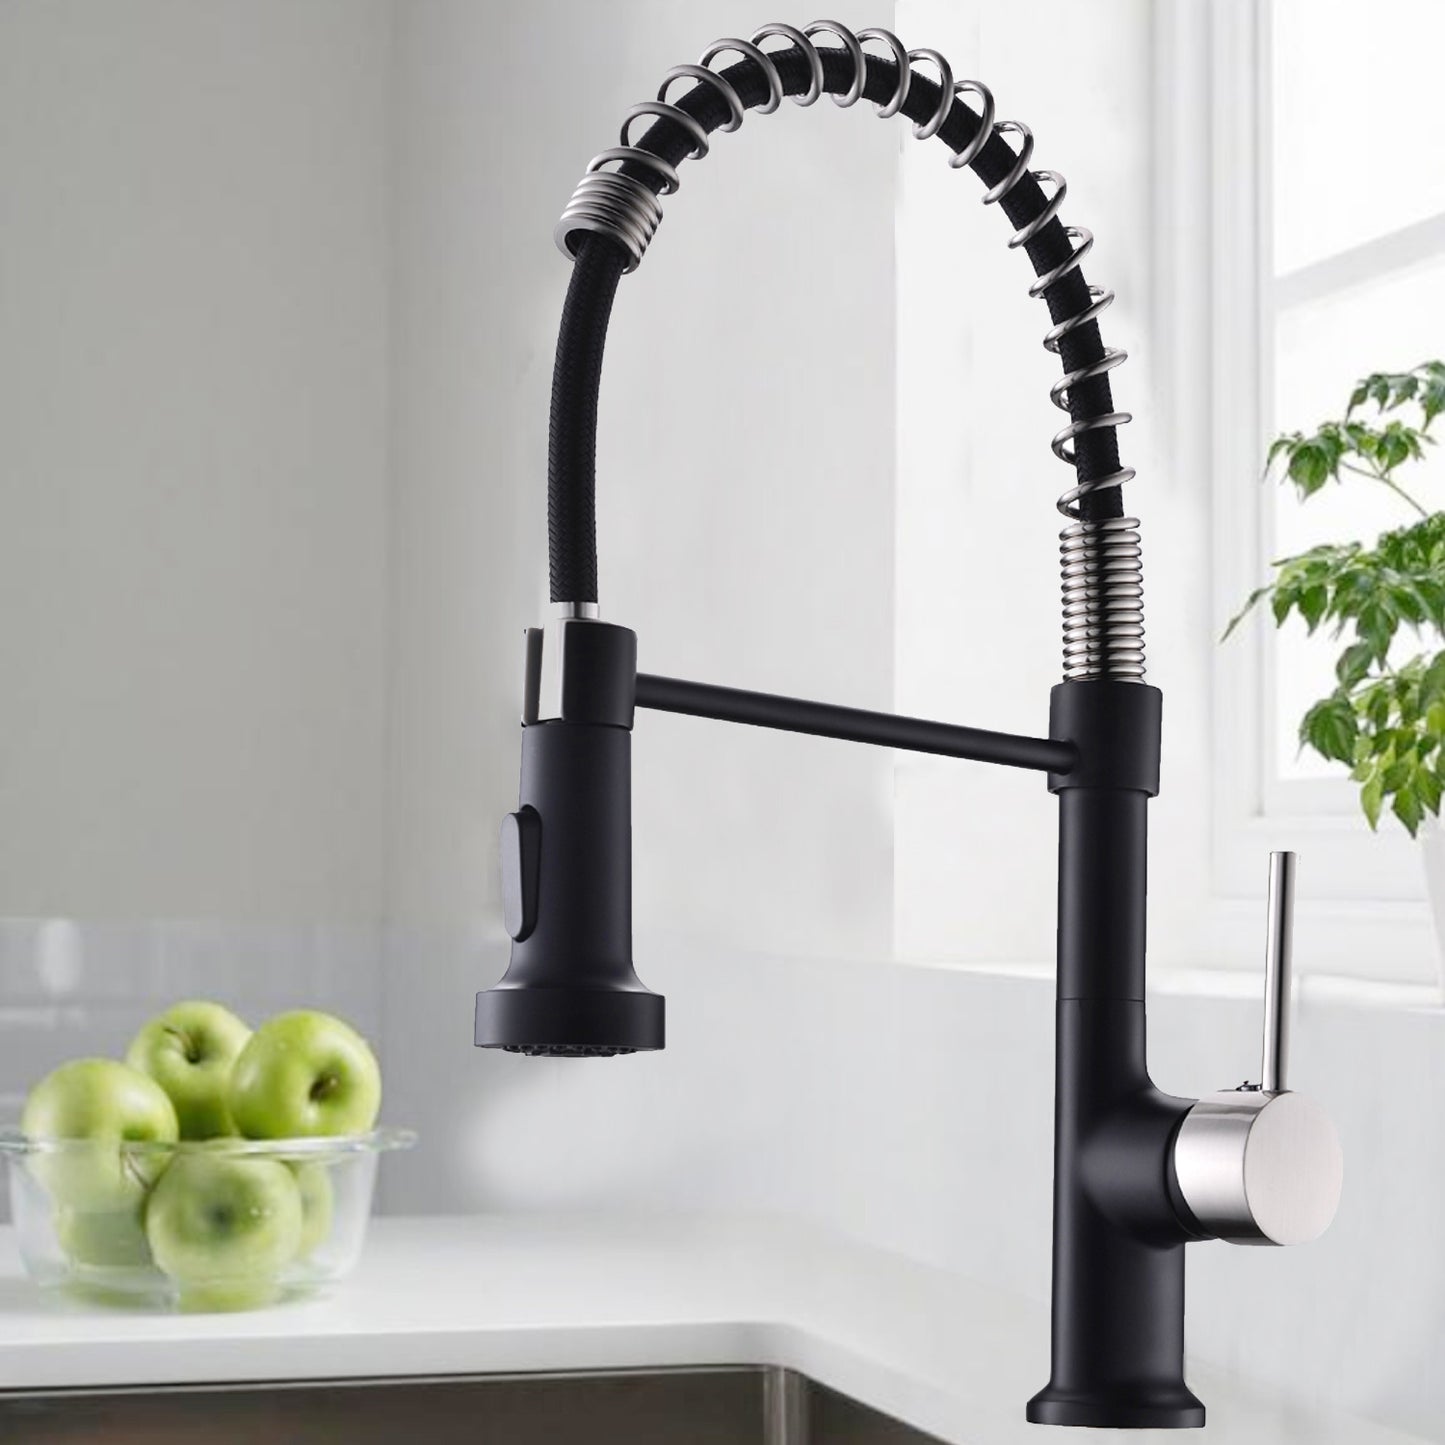 AvaMalis A|M Aquae The new model is beautiful and durable Single Handle Pull-Down Sprayer Kitchen Faucet in Black+Gold